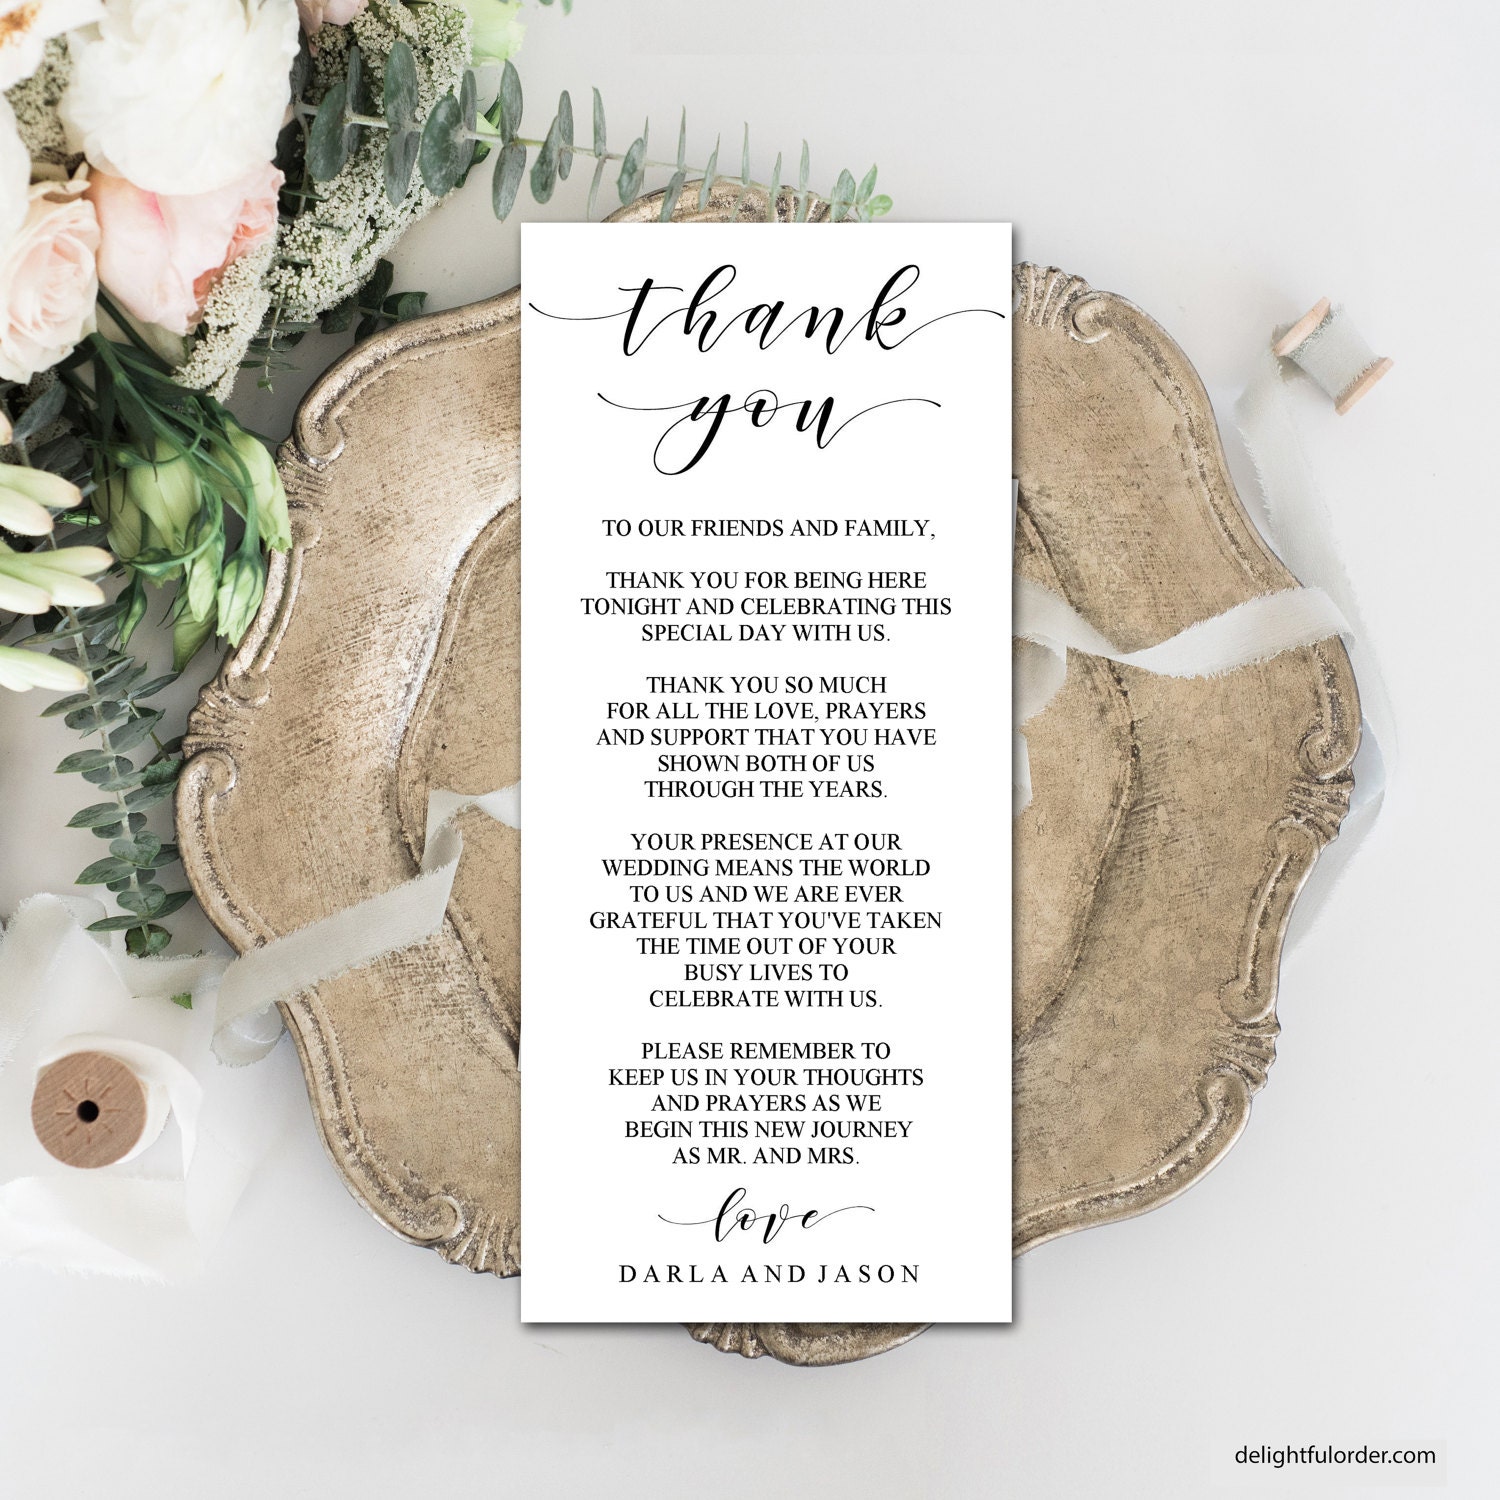 Editable Thank You Place Cards, Elegant, Modern Design, Printable Template,  DIY Wedding, PDF, Instant Download - Editable Printable File With Celebrate It Templates Place Cards